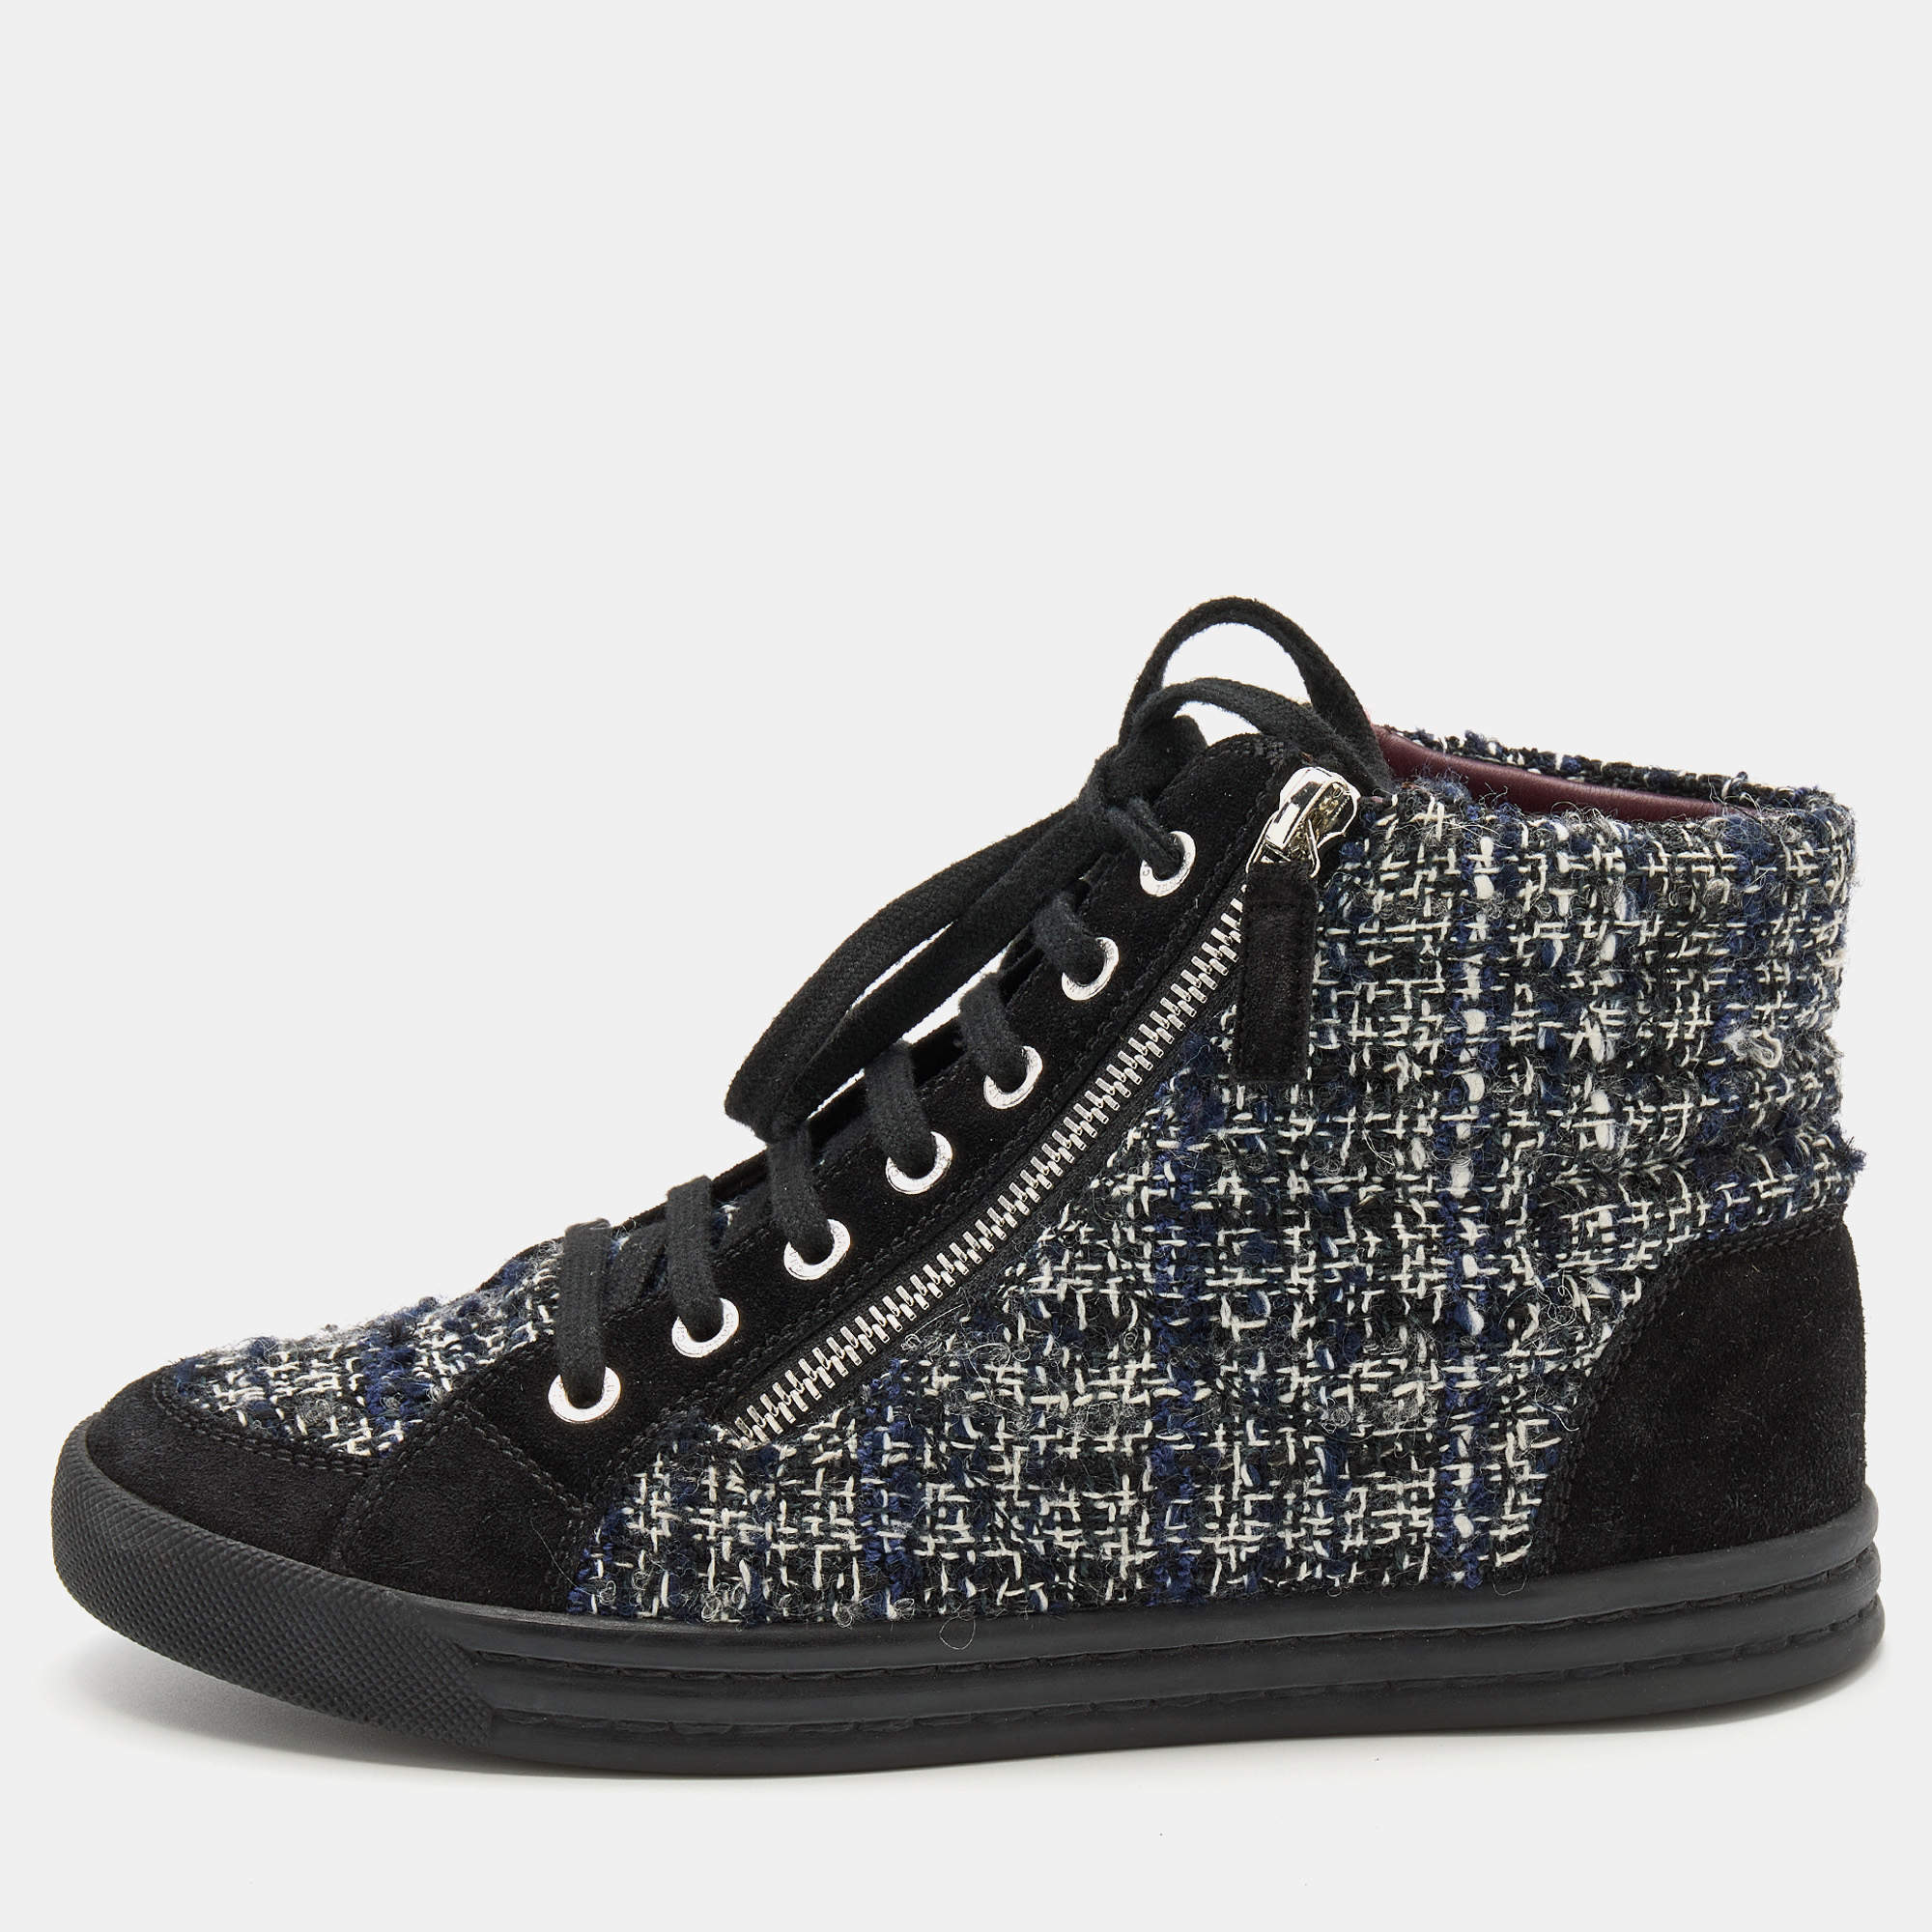 Chanel Blue/Black Tweed Fabric And Suede Leather Double Zipper High Top Sneakers Size 36